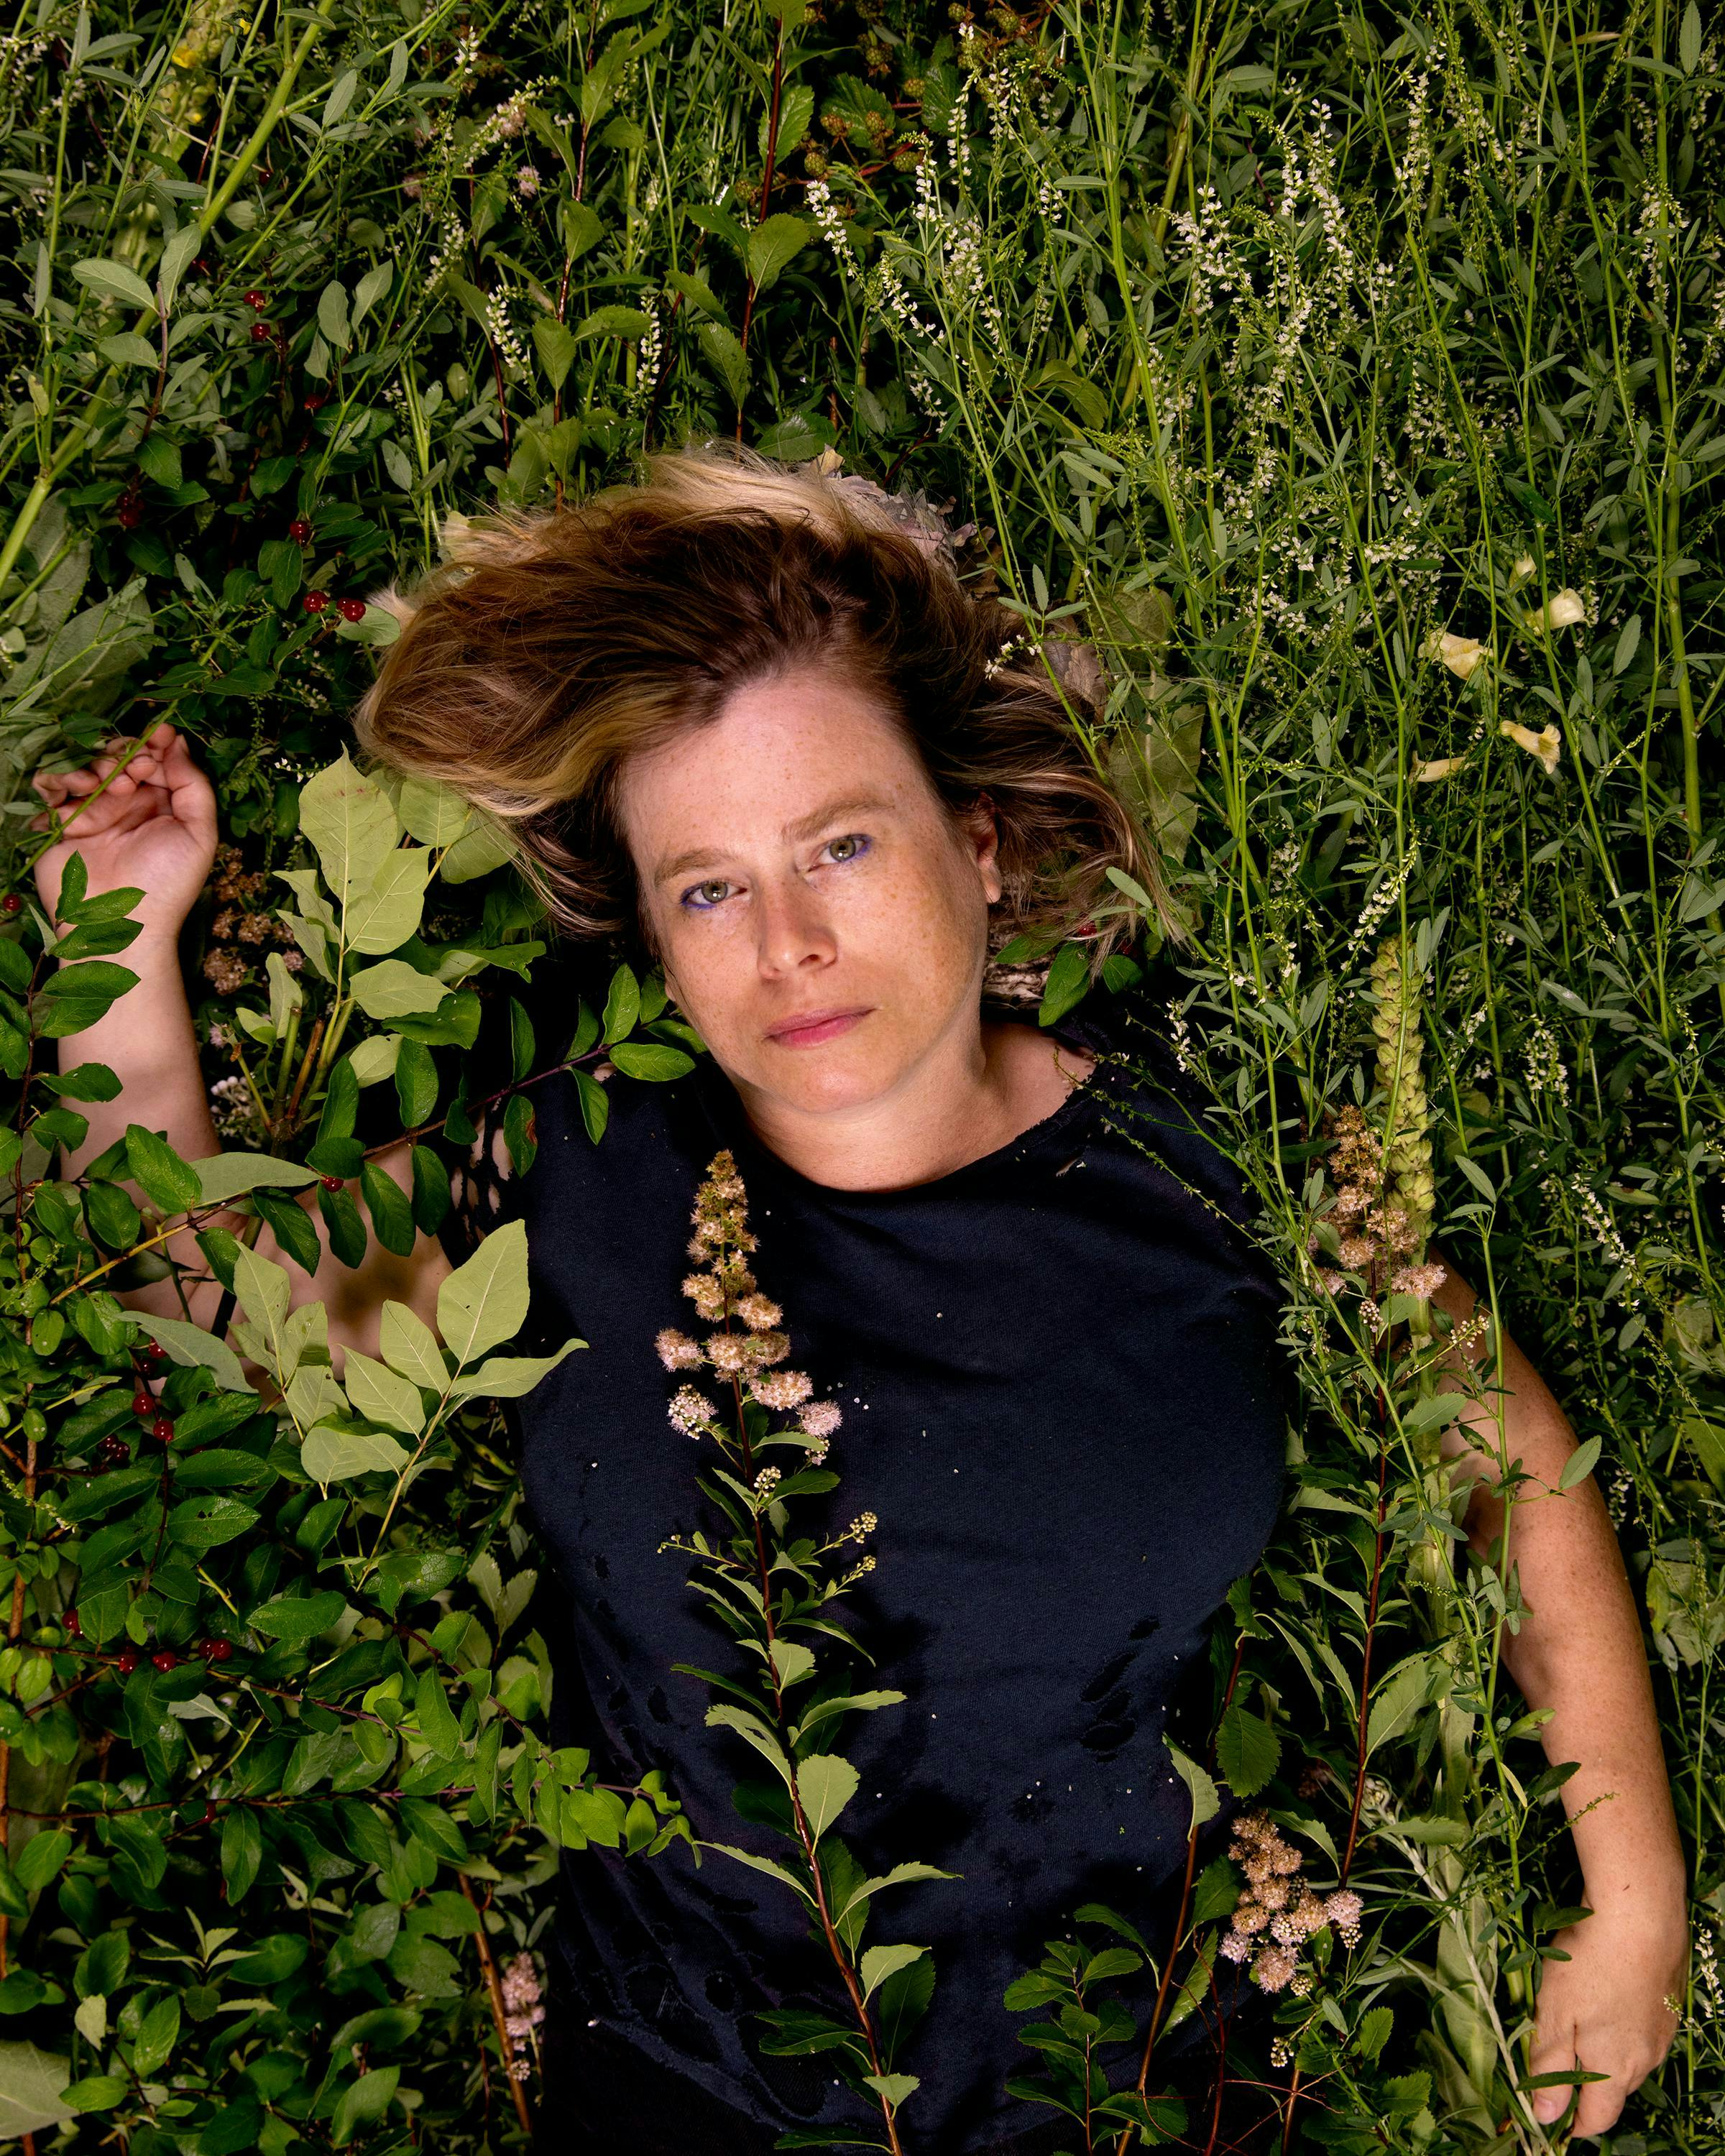 Photo of the artist Lilly McElroy surrounded by plants.